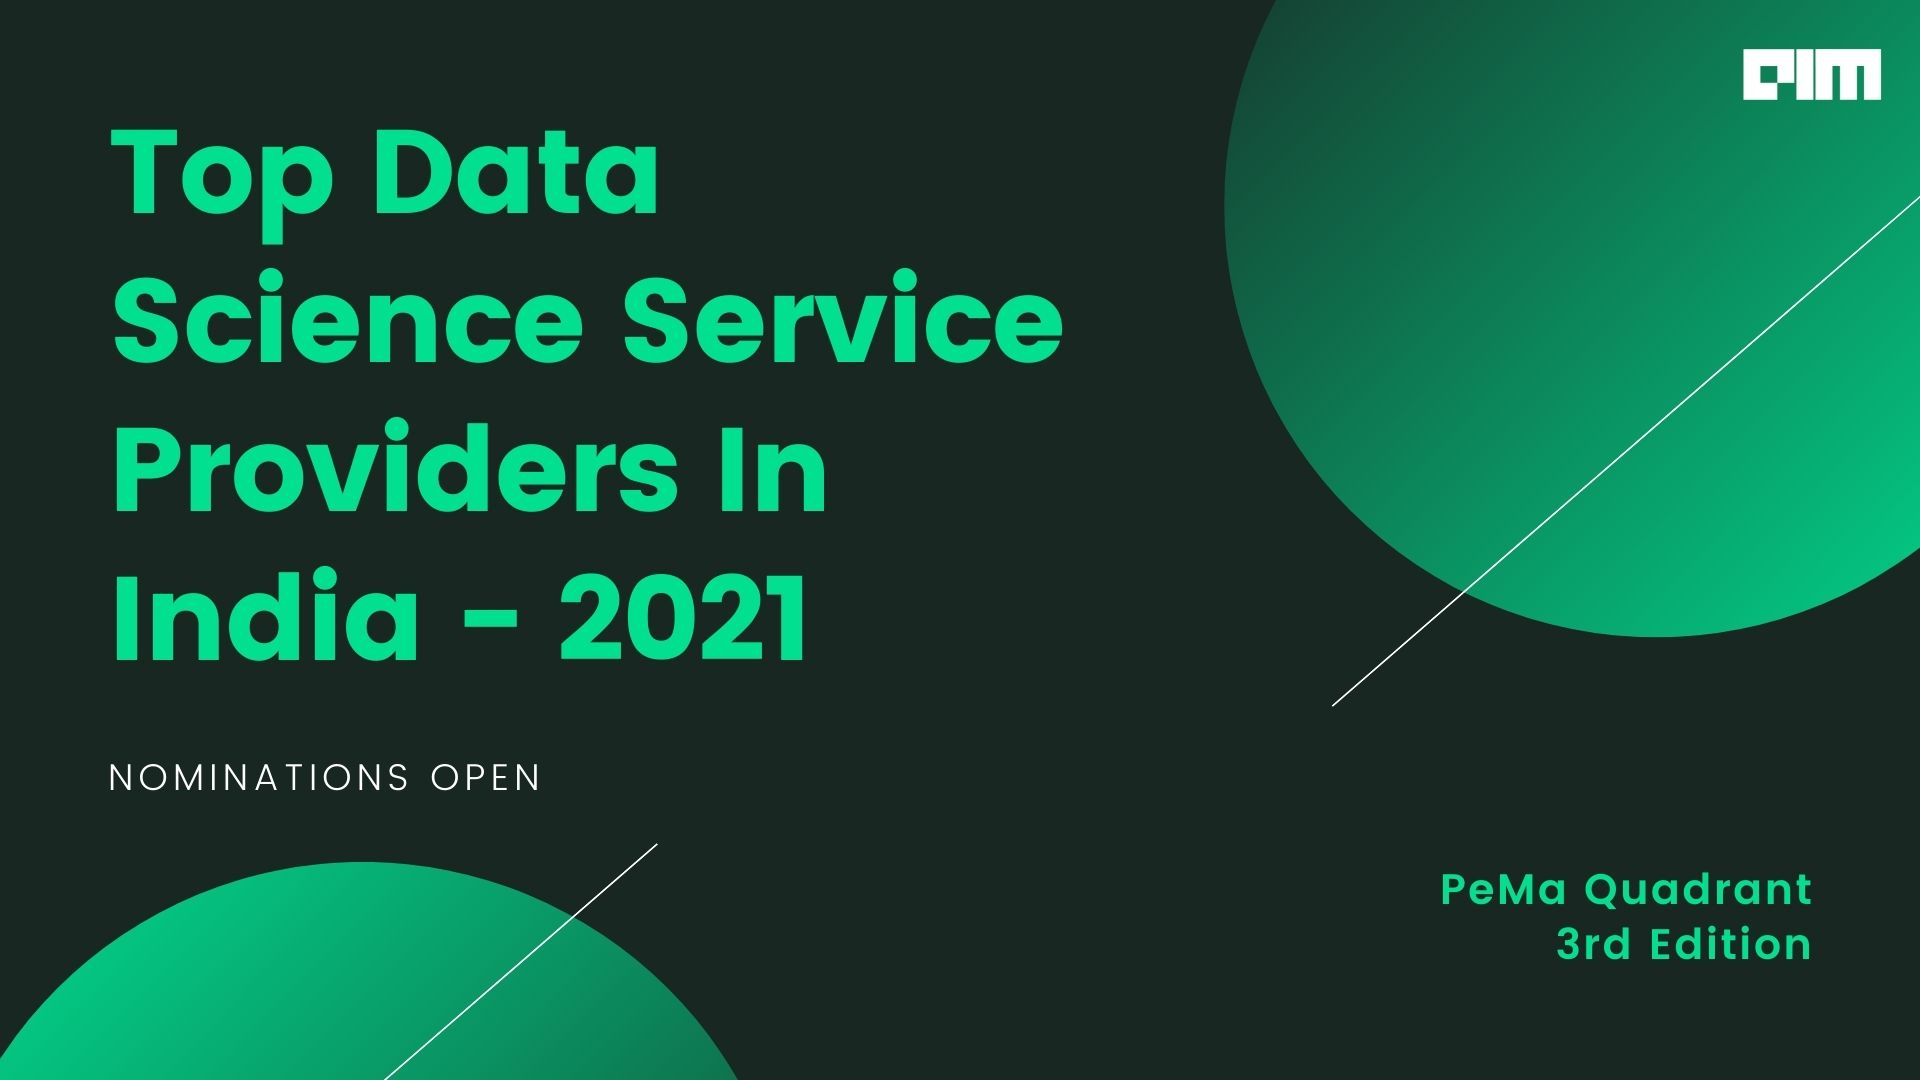 Are You Among The Top Data Science Service Providers In India? Find Out Using Our PeMa Quadrant.